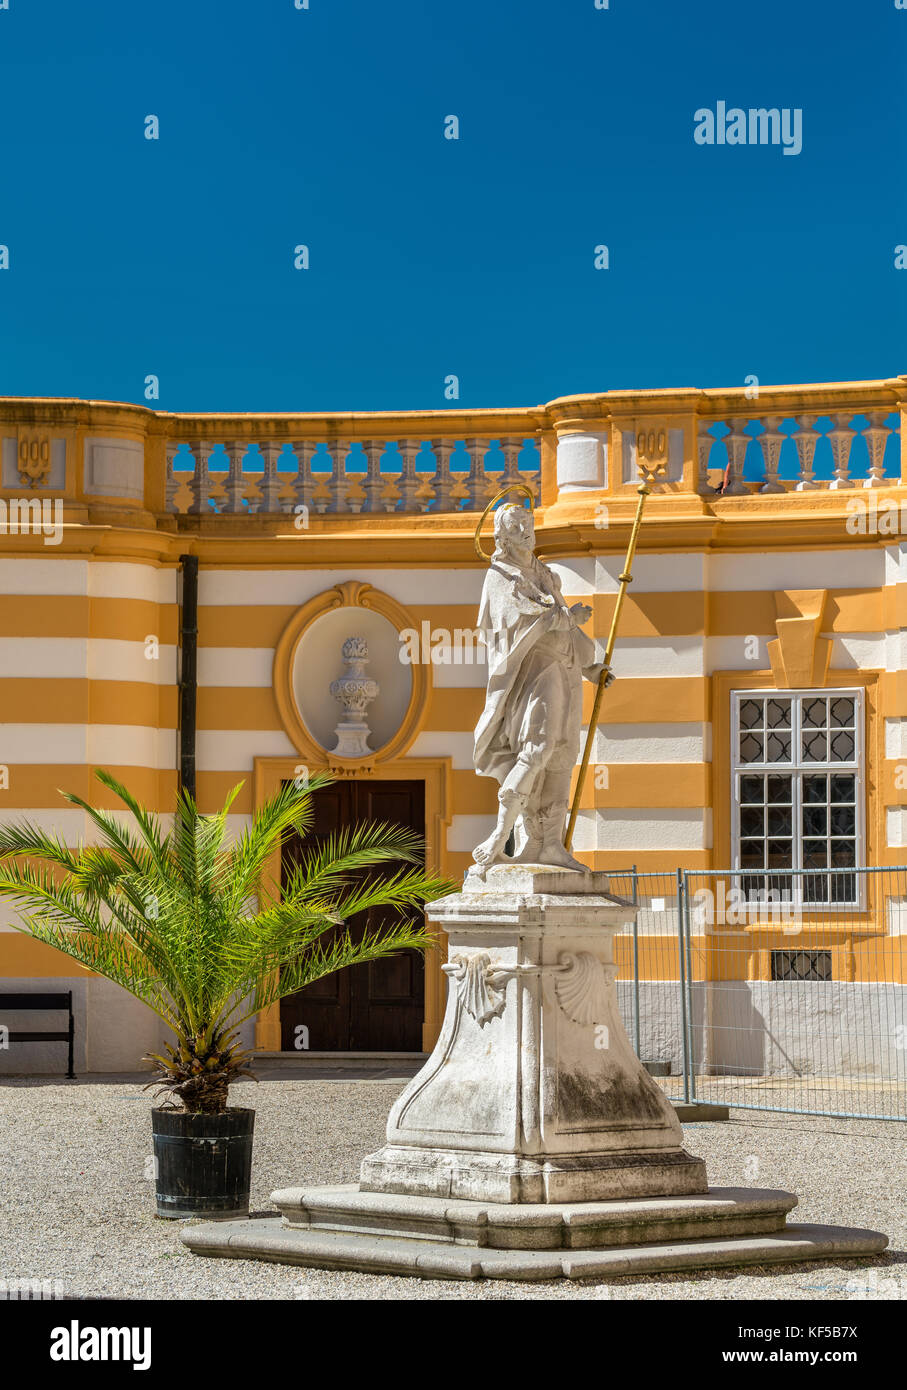 Statue at Stift Melk, a Benedictine abbey in the town of Melk in Austria Stock Photo